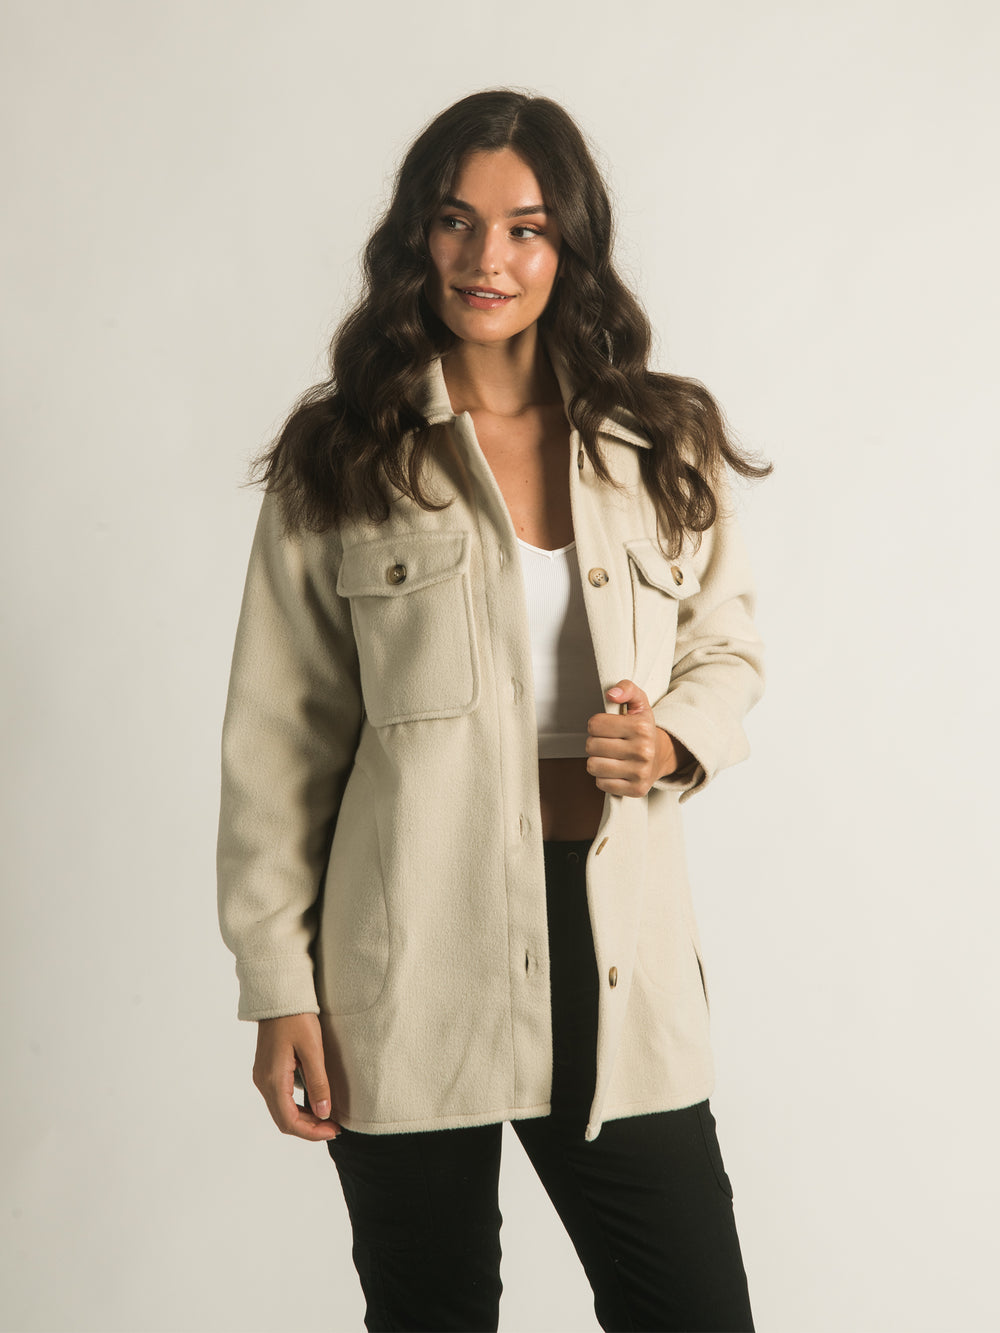 HARLOW GWEN SOLID SHIRT JACKET - CLEARANCE